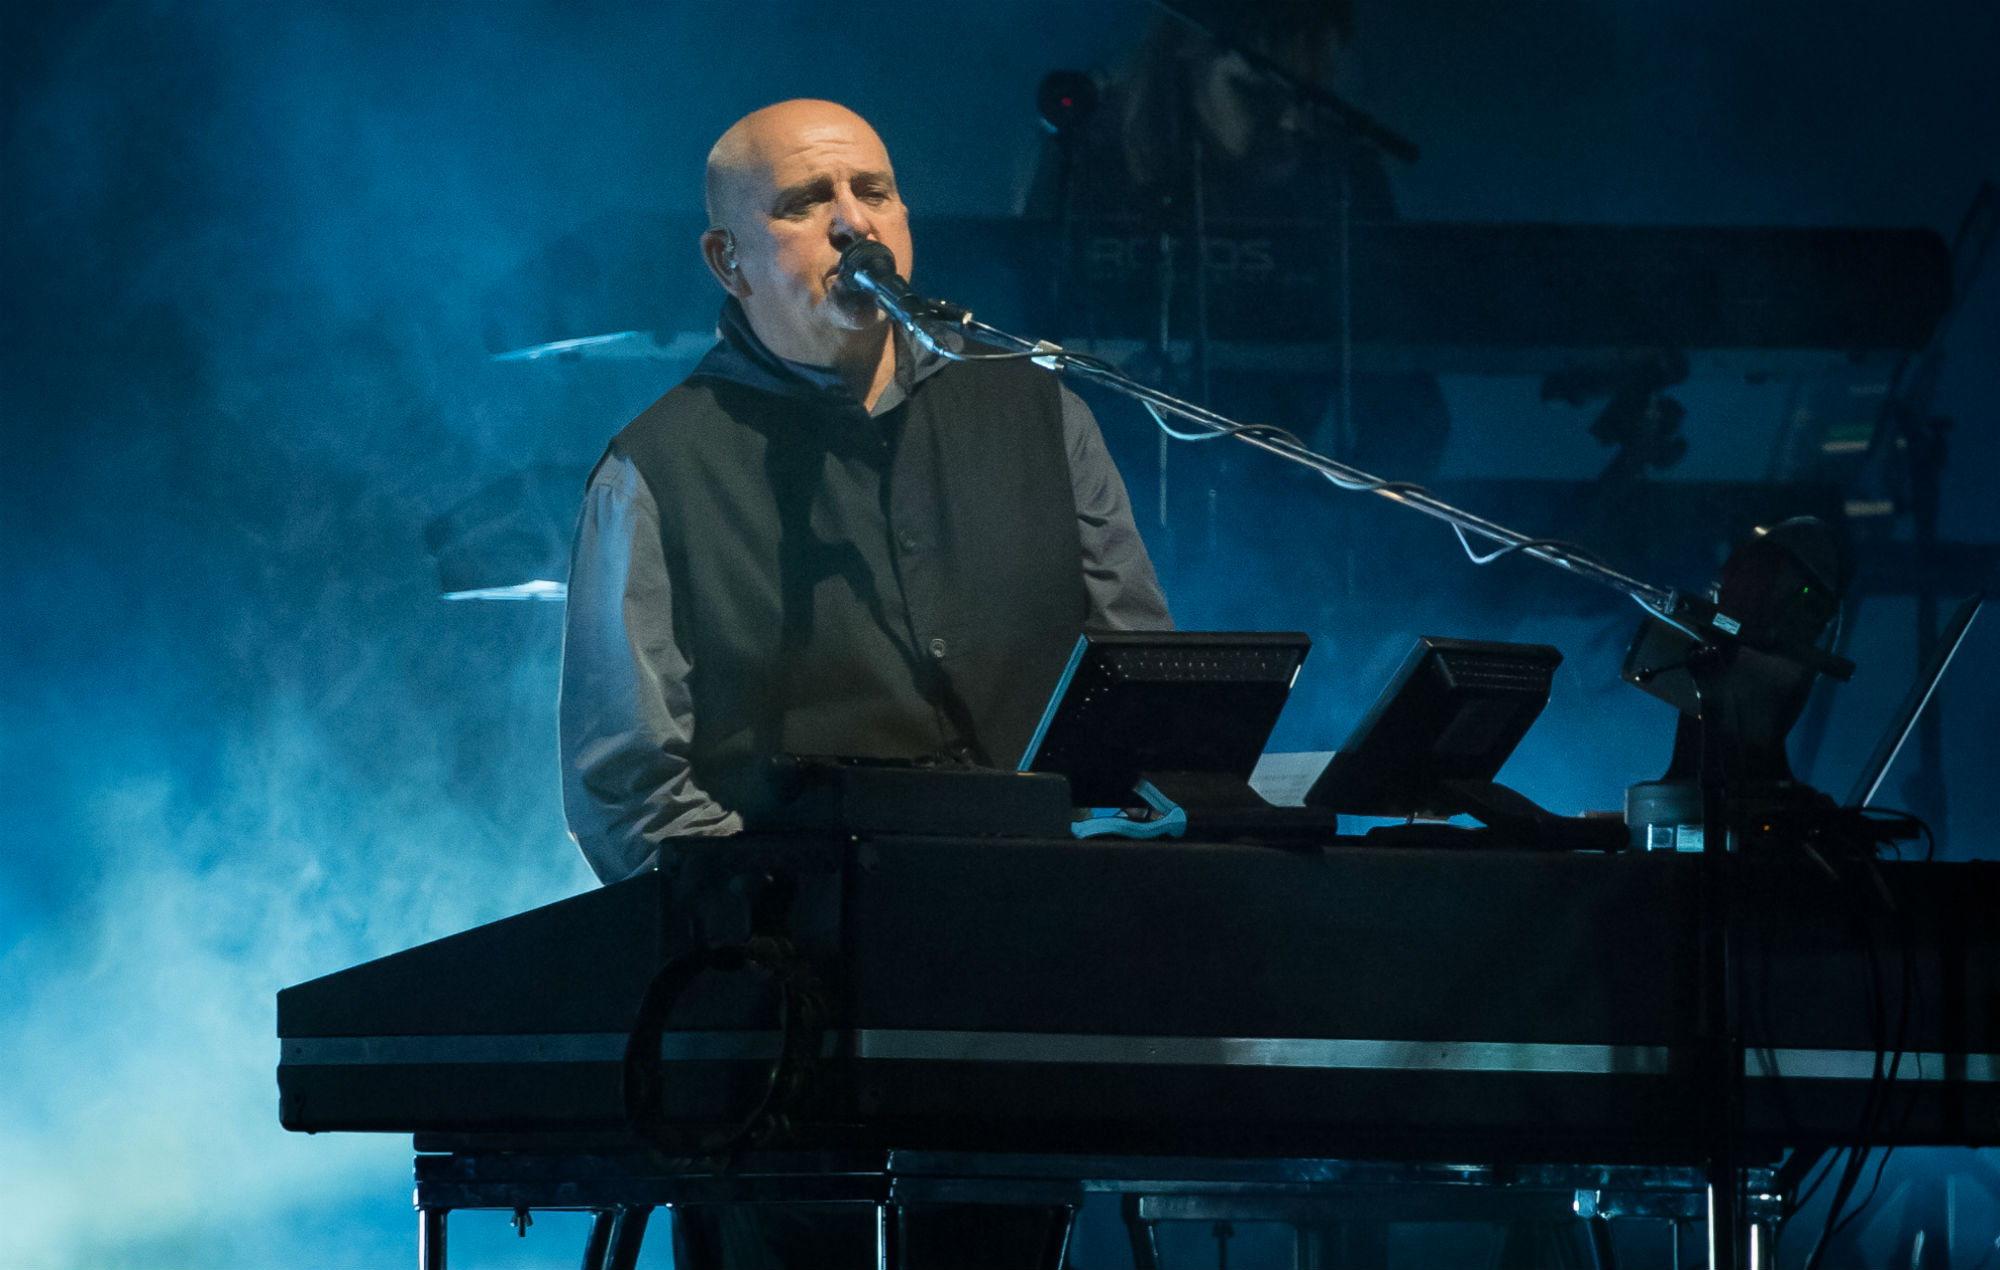 Peter Gabriel teams up with his daughter and Brian Eno for song ‘Four Kinds Of Horses’